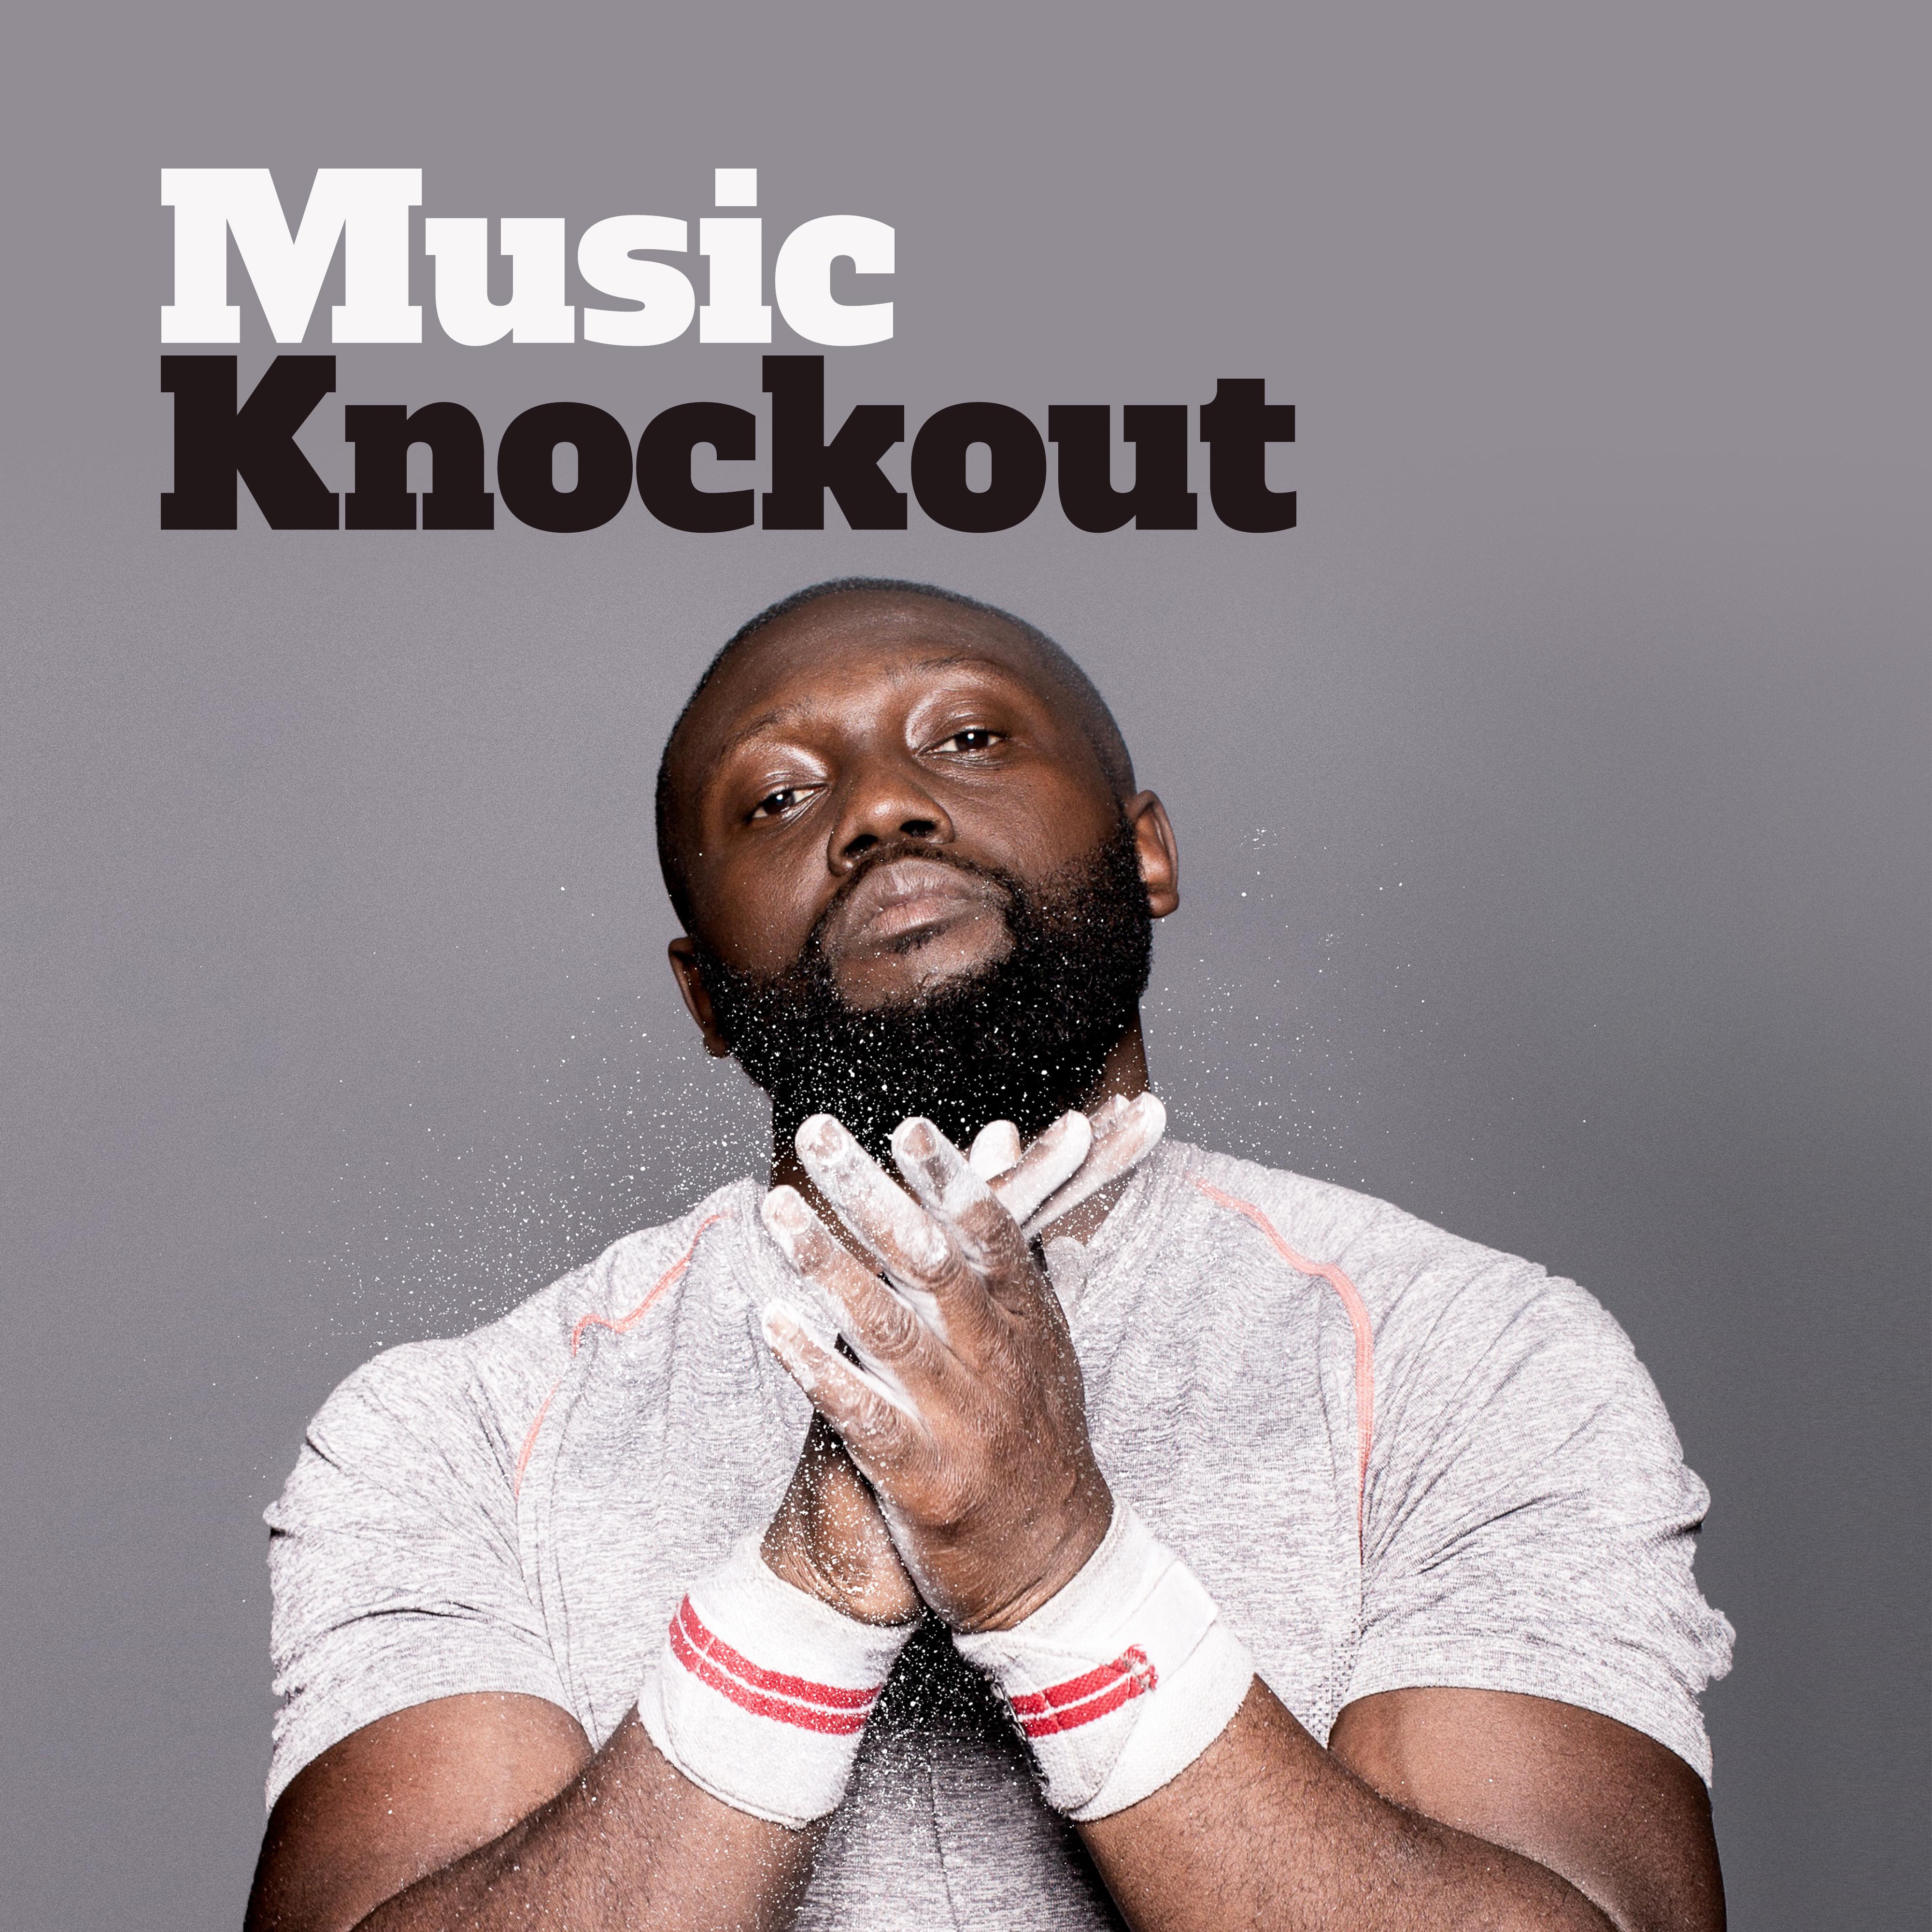 Music Knockout - Set for Real Beasts and Fighters: for Strength, Fitness and Physical Training, Combat Sports and Bodybuilding, Workout and Martial Arts, for Gym and Home Exercises